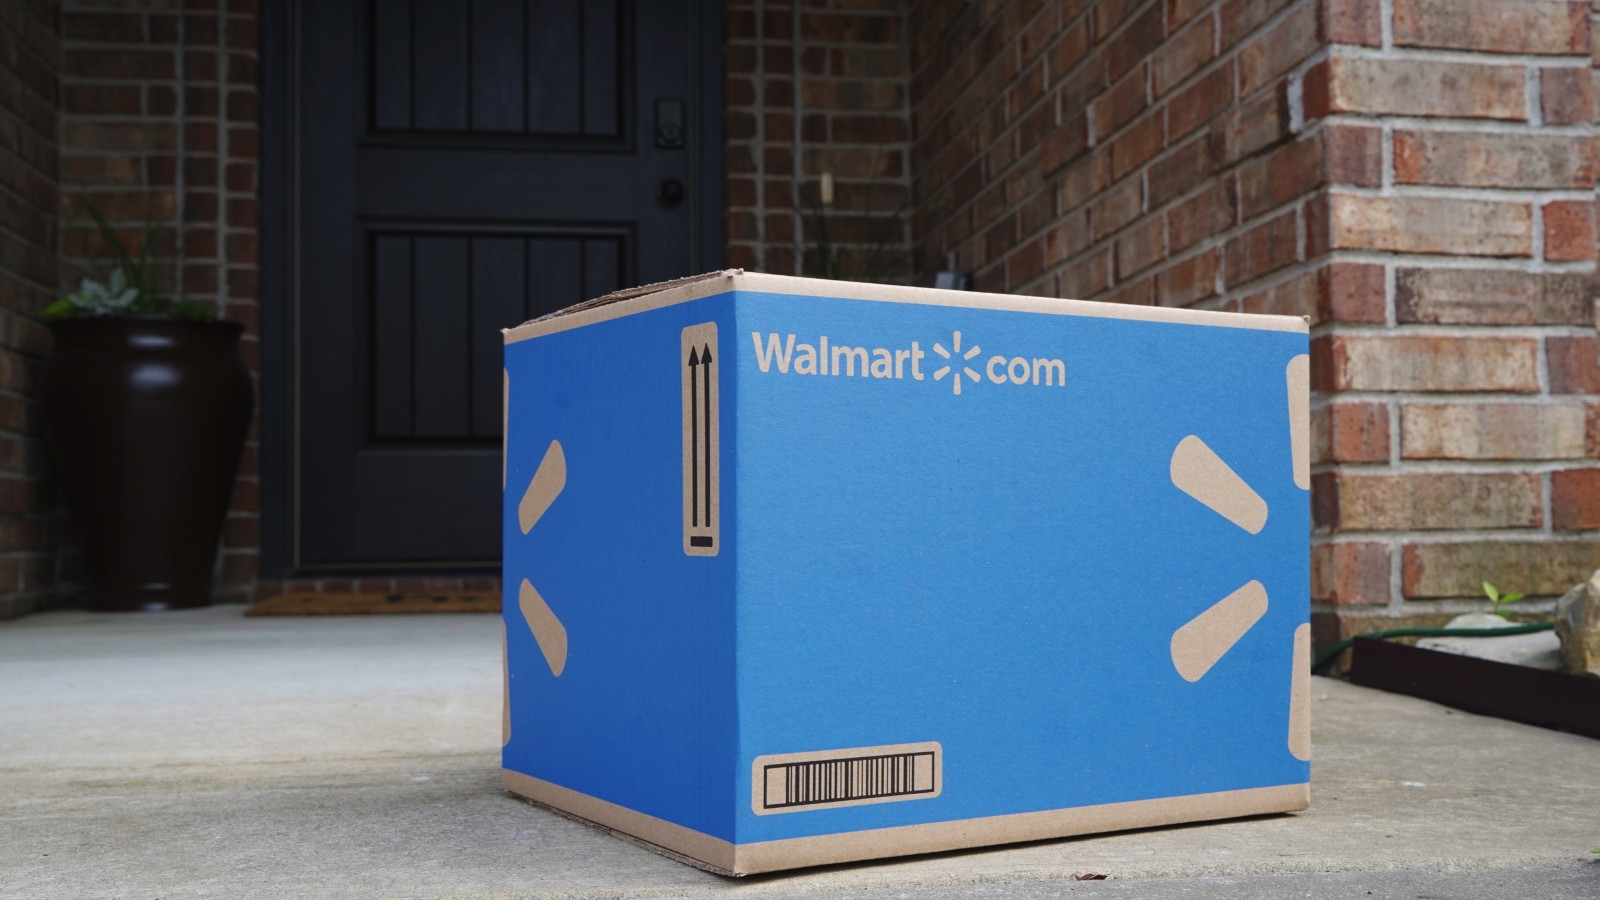 Walmart Cyber Monday 2020 Gross sales, Gives on TVs, Appliances, Gaming and Extra